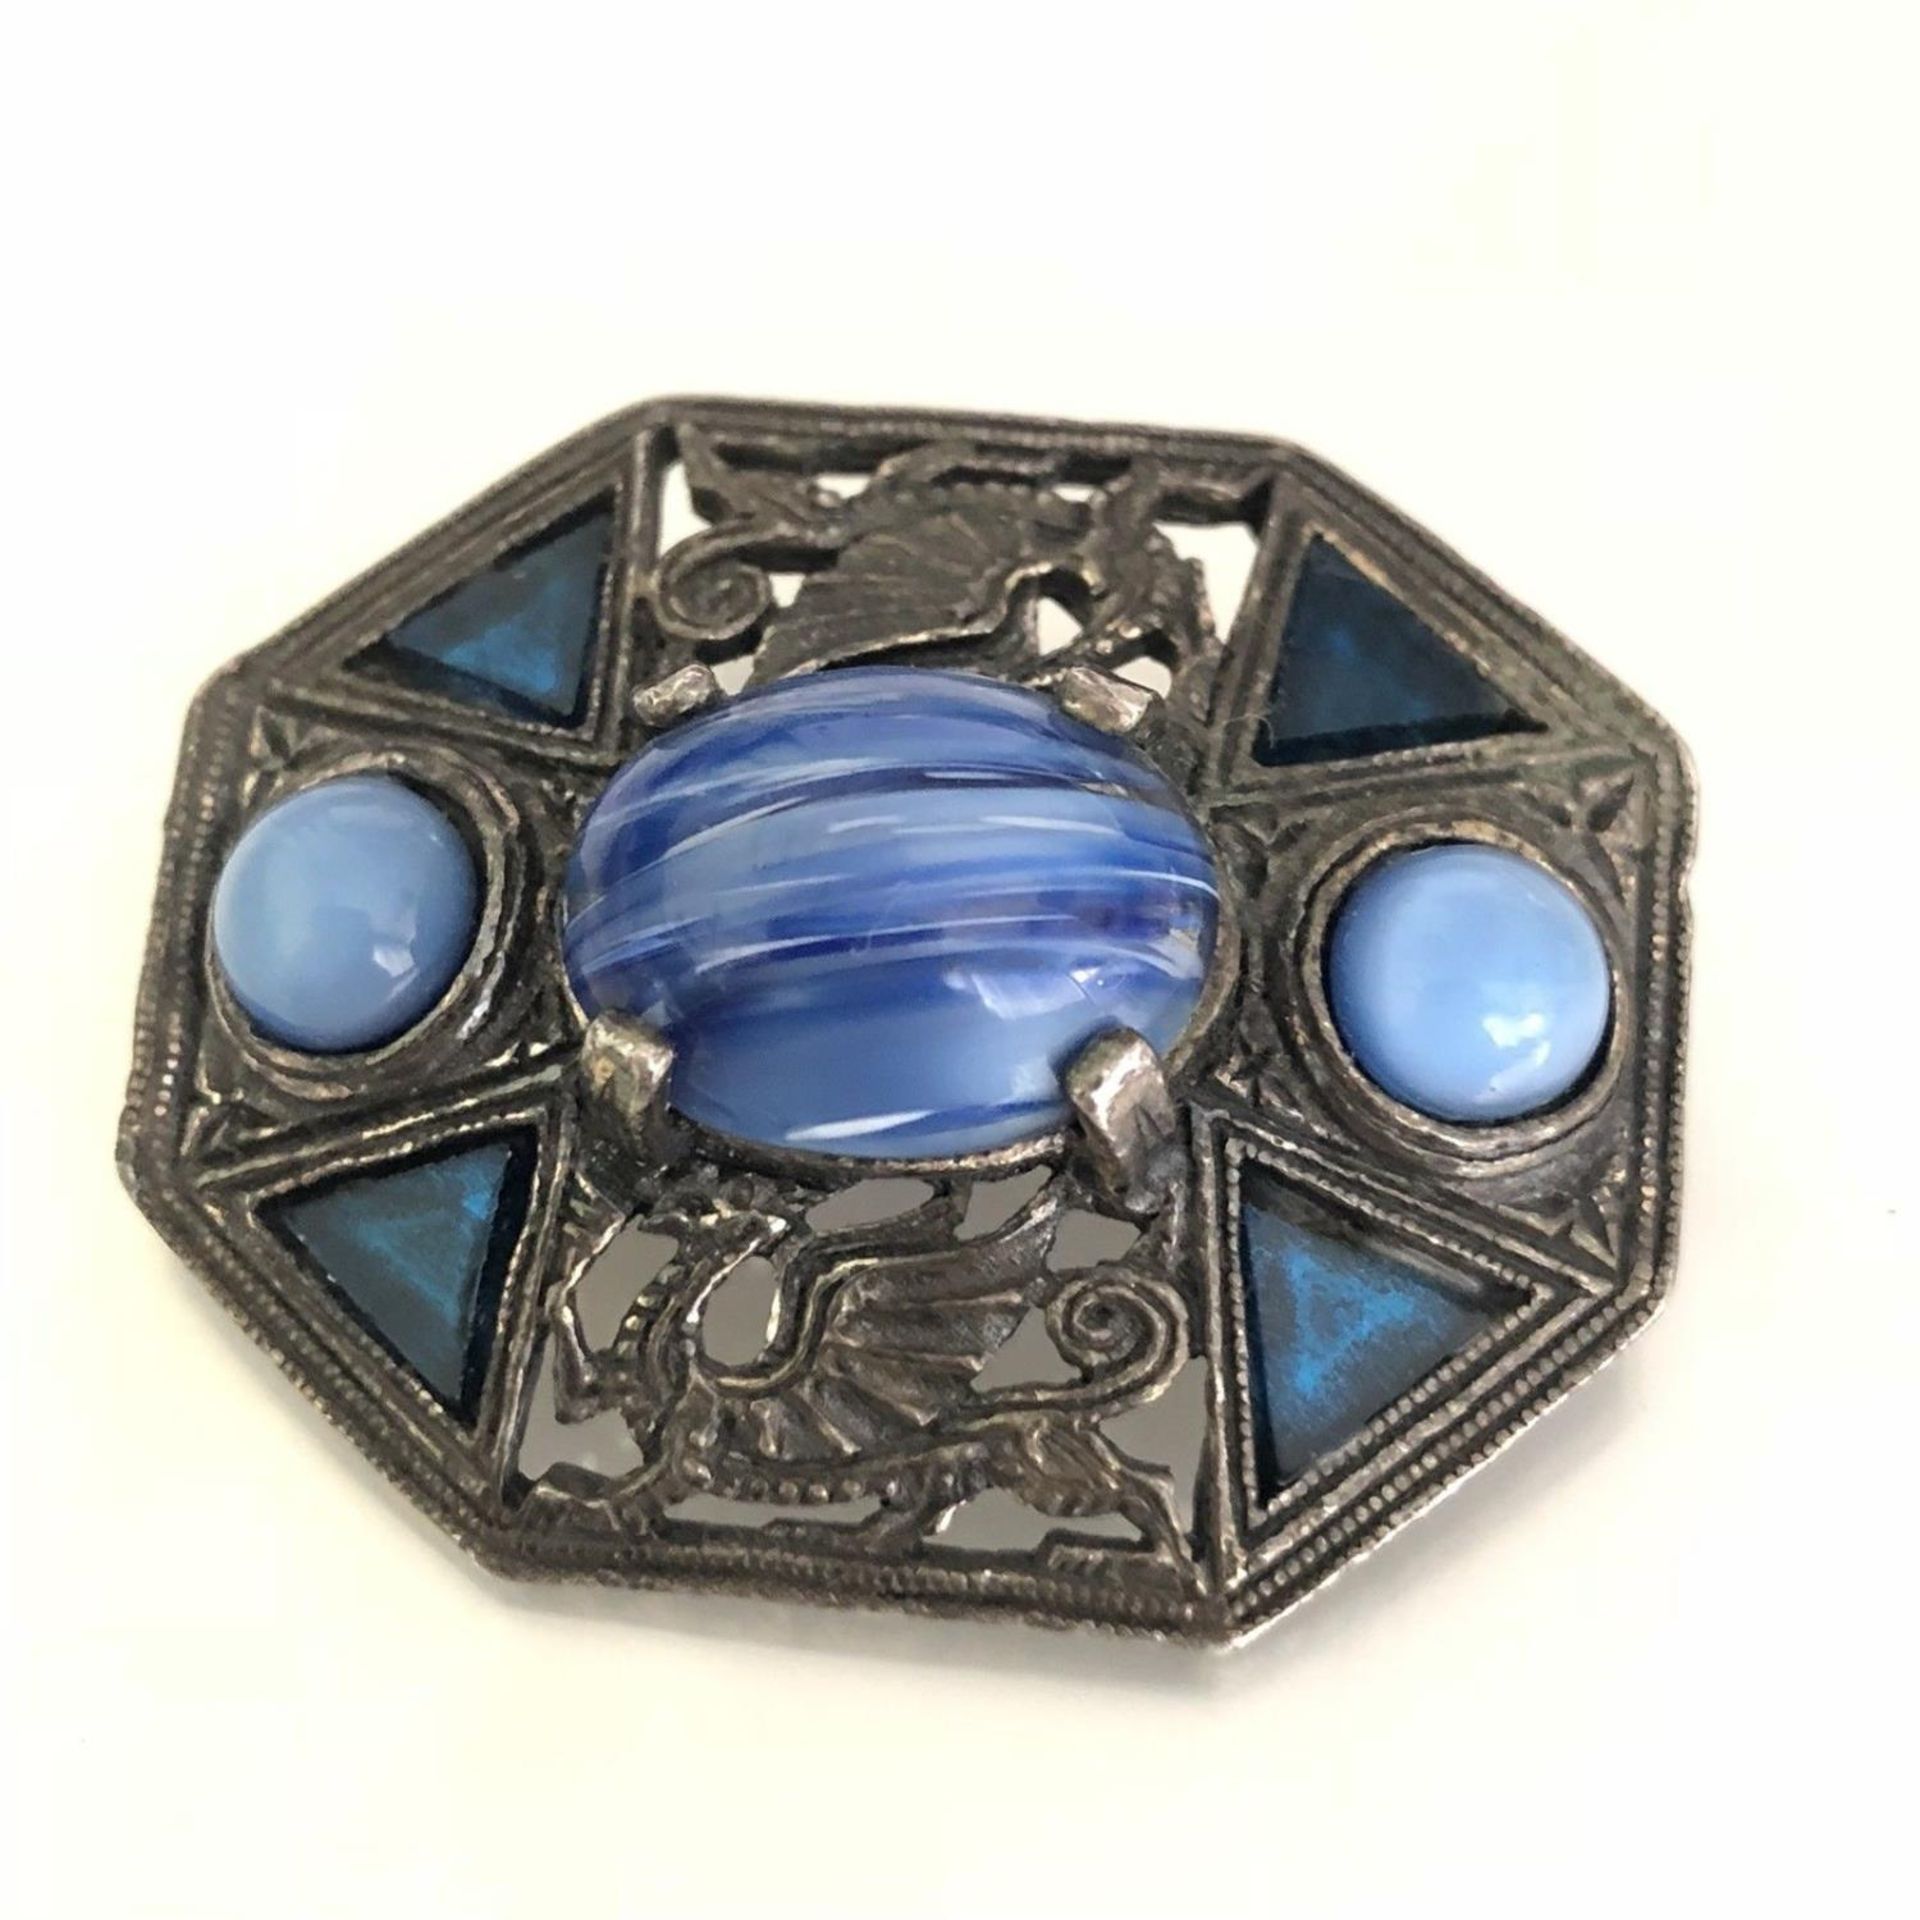 Vintage Brooch by Miracle - Celtic Welsh Dragons with Blue Stones - Image 2 of 3